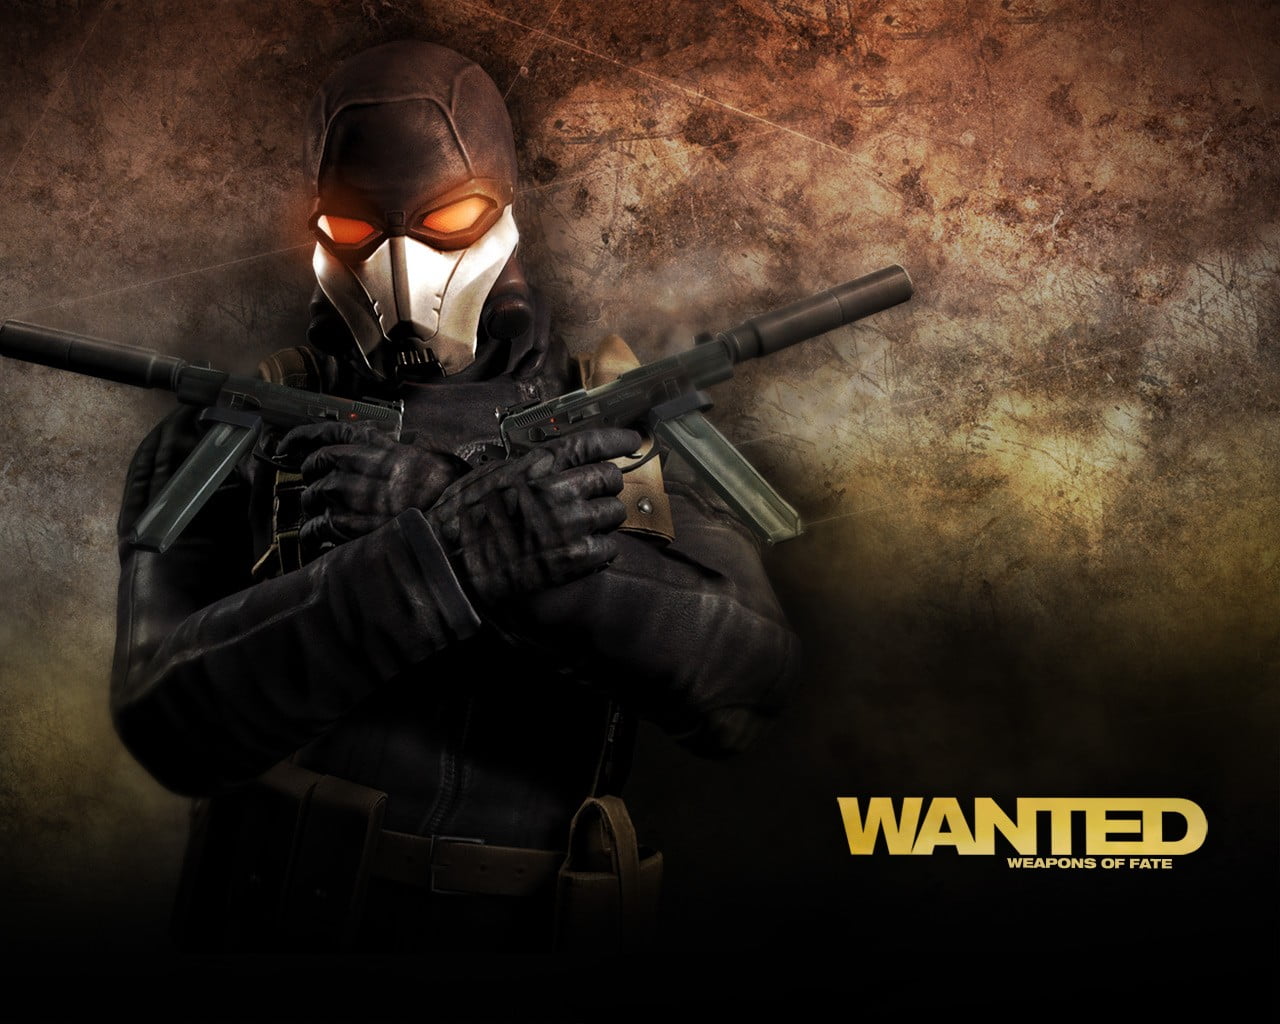 Wanted Weapons of Fate digital wallpaper, Wanted: Weapons of Fate, Wanted, machine gun